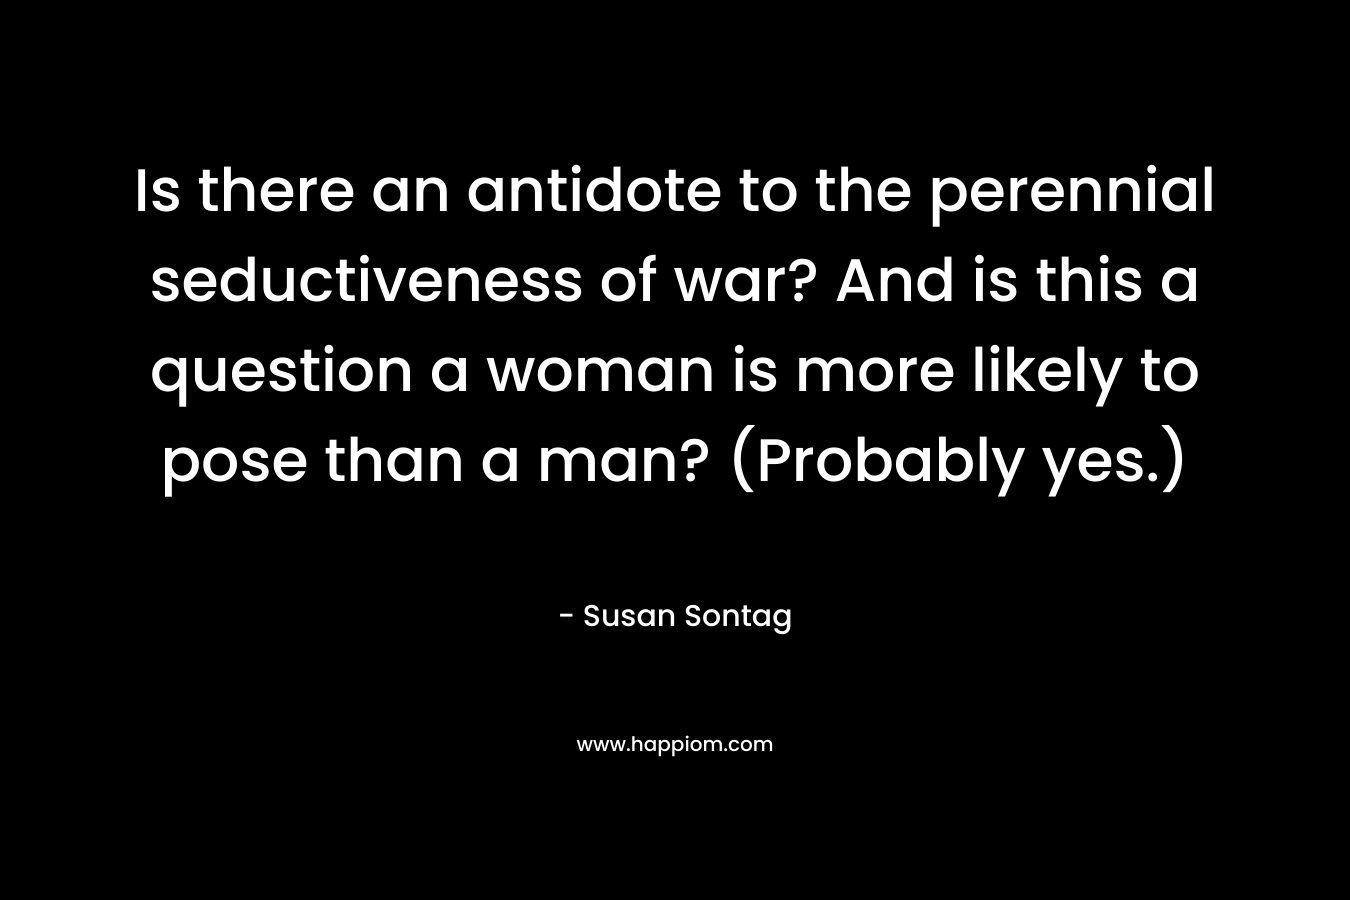 Is there an antidote to the perennial seductiveness of war? And is this a question a woman is more likely to pose than a man? (Probably yes.)